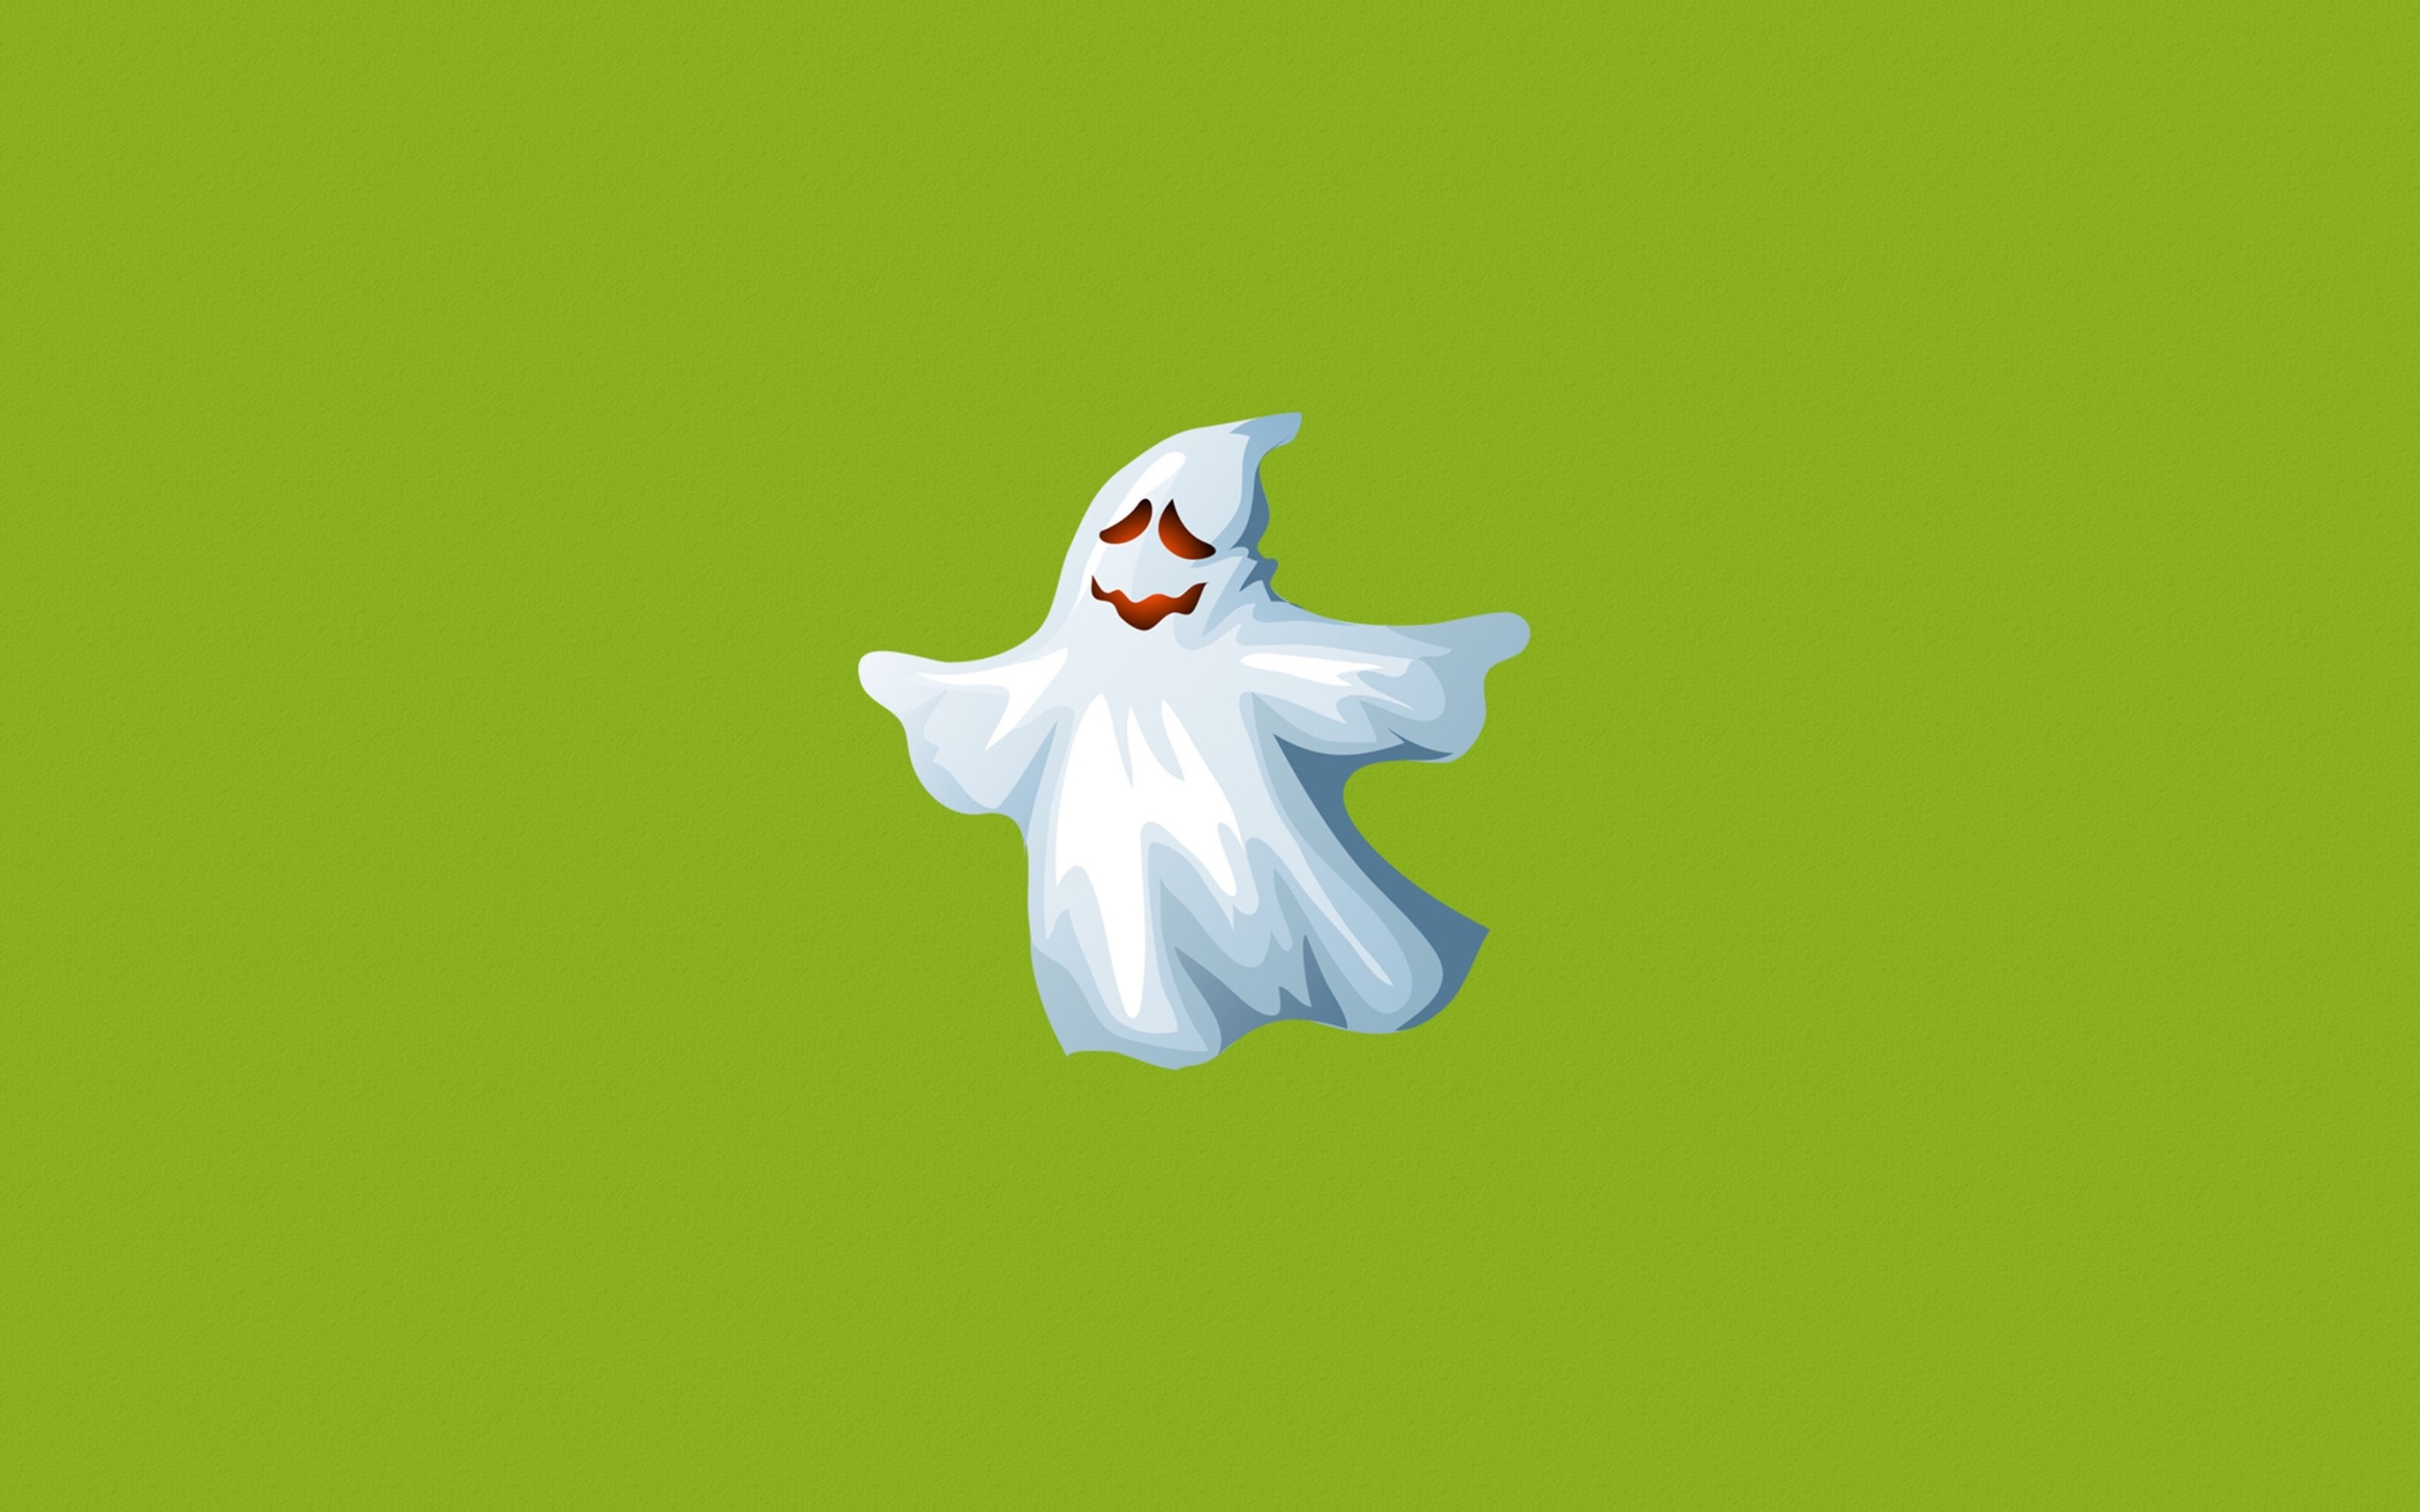 Ghost for 2880 x 1800 Retina Display resolution